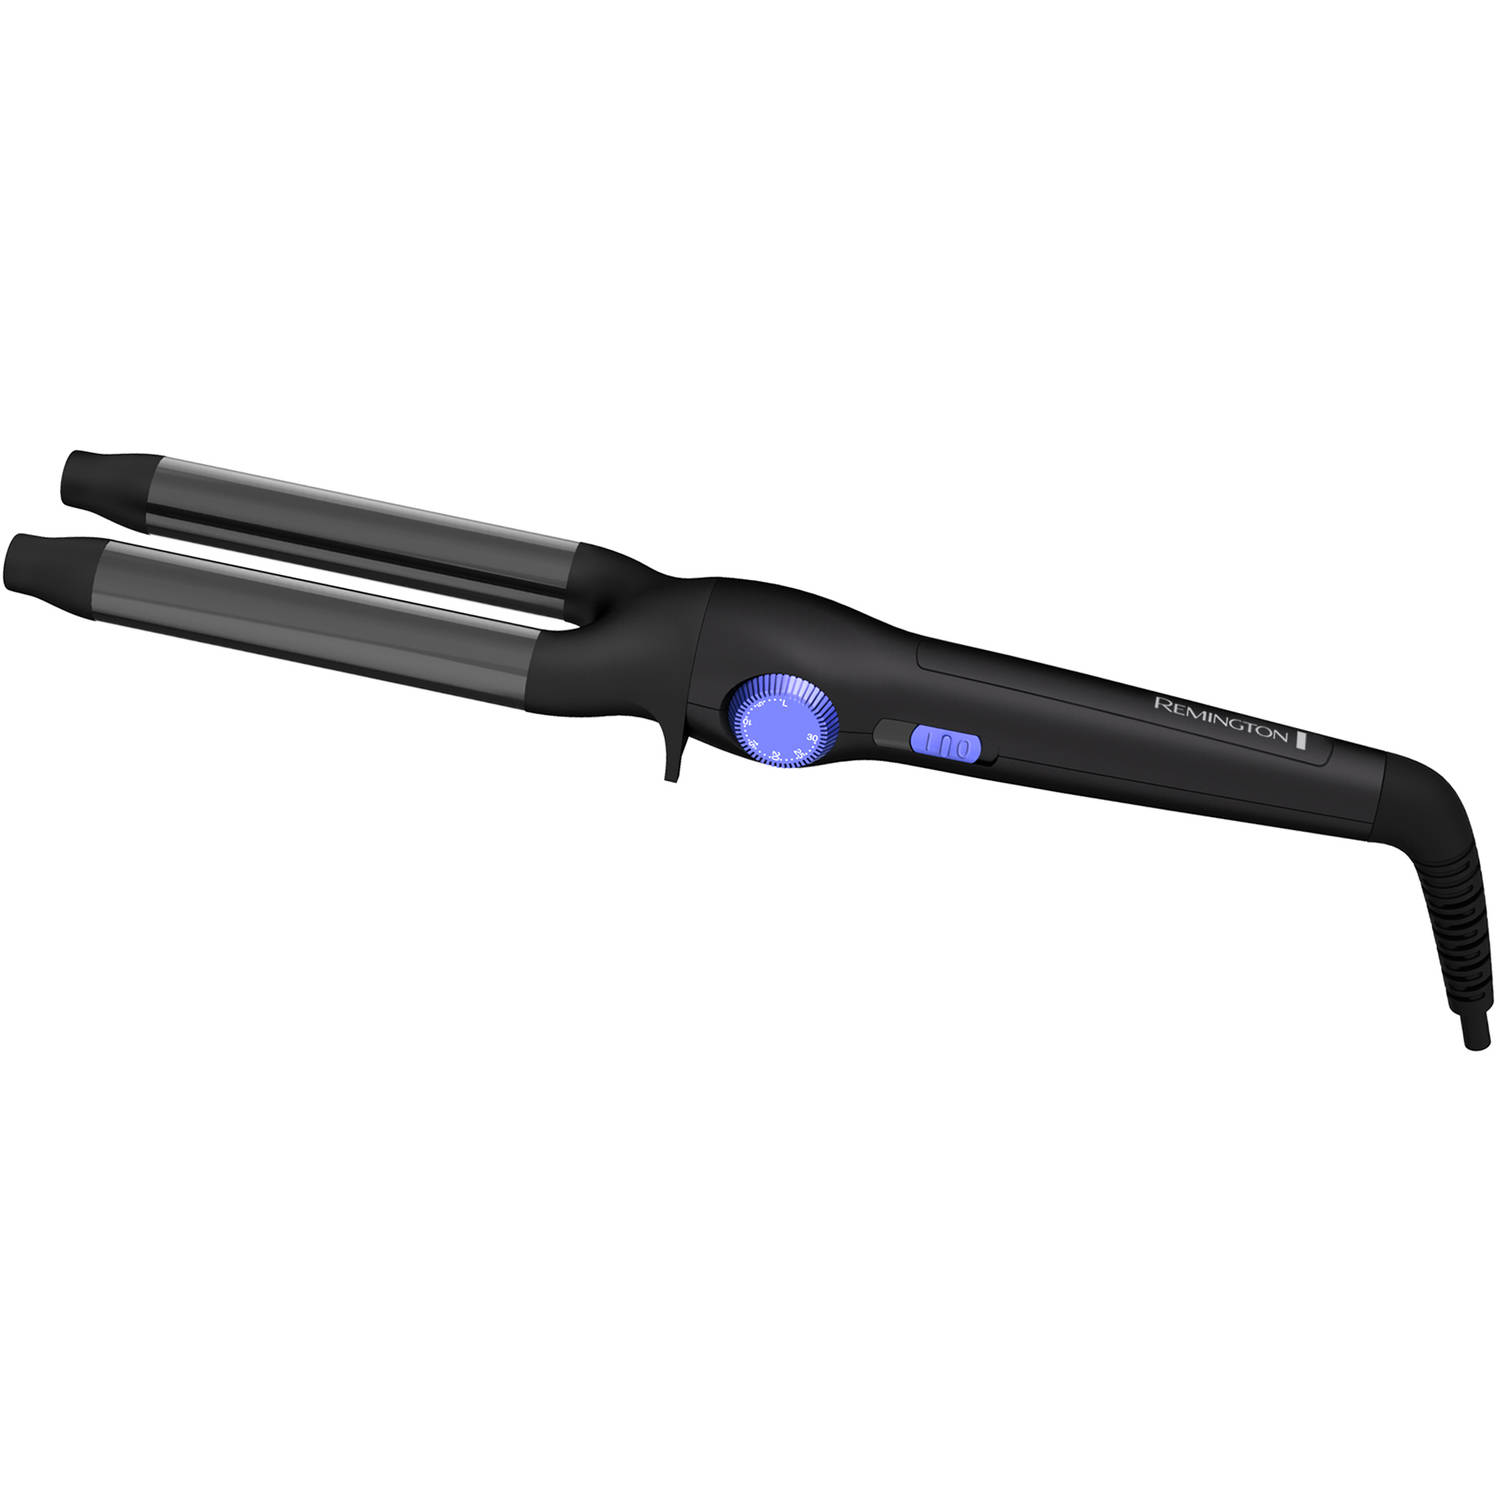 Remington CI52F0 Wrap To Waves Styler - image 1 of 3